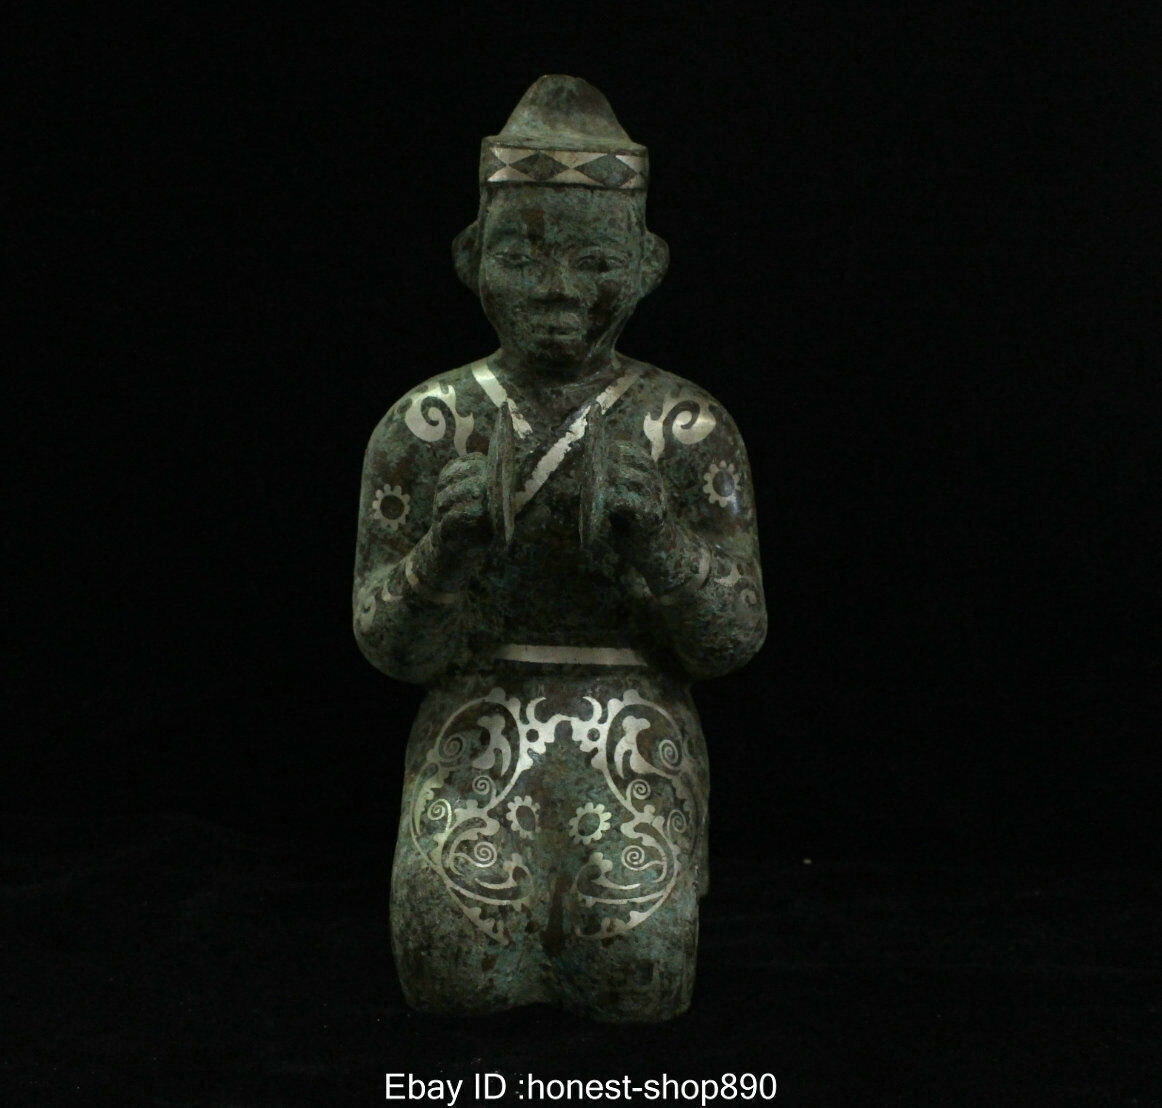 Old China Chinese Antique Bronze Ware Silver Dynasty Kneel People Music Statue